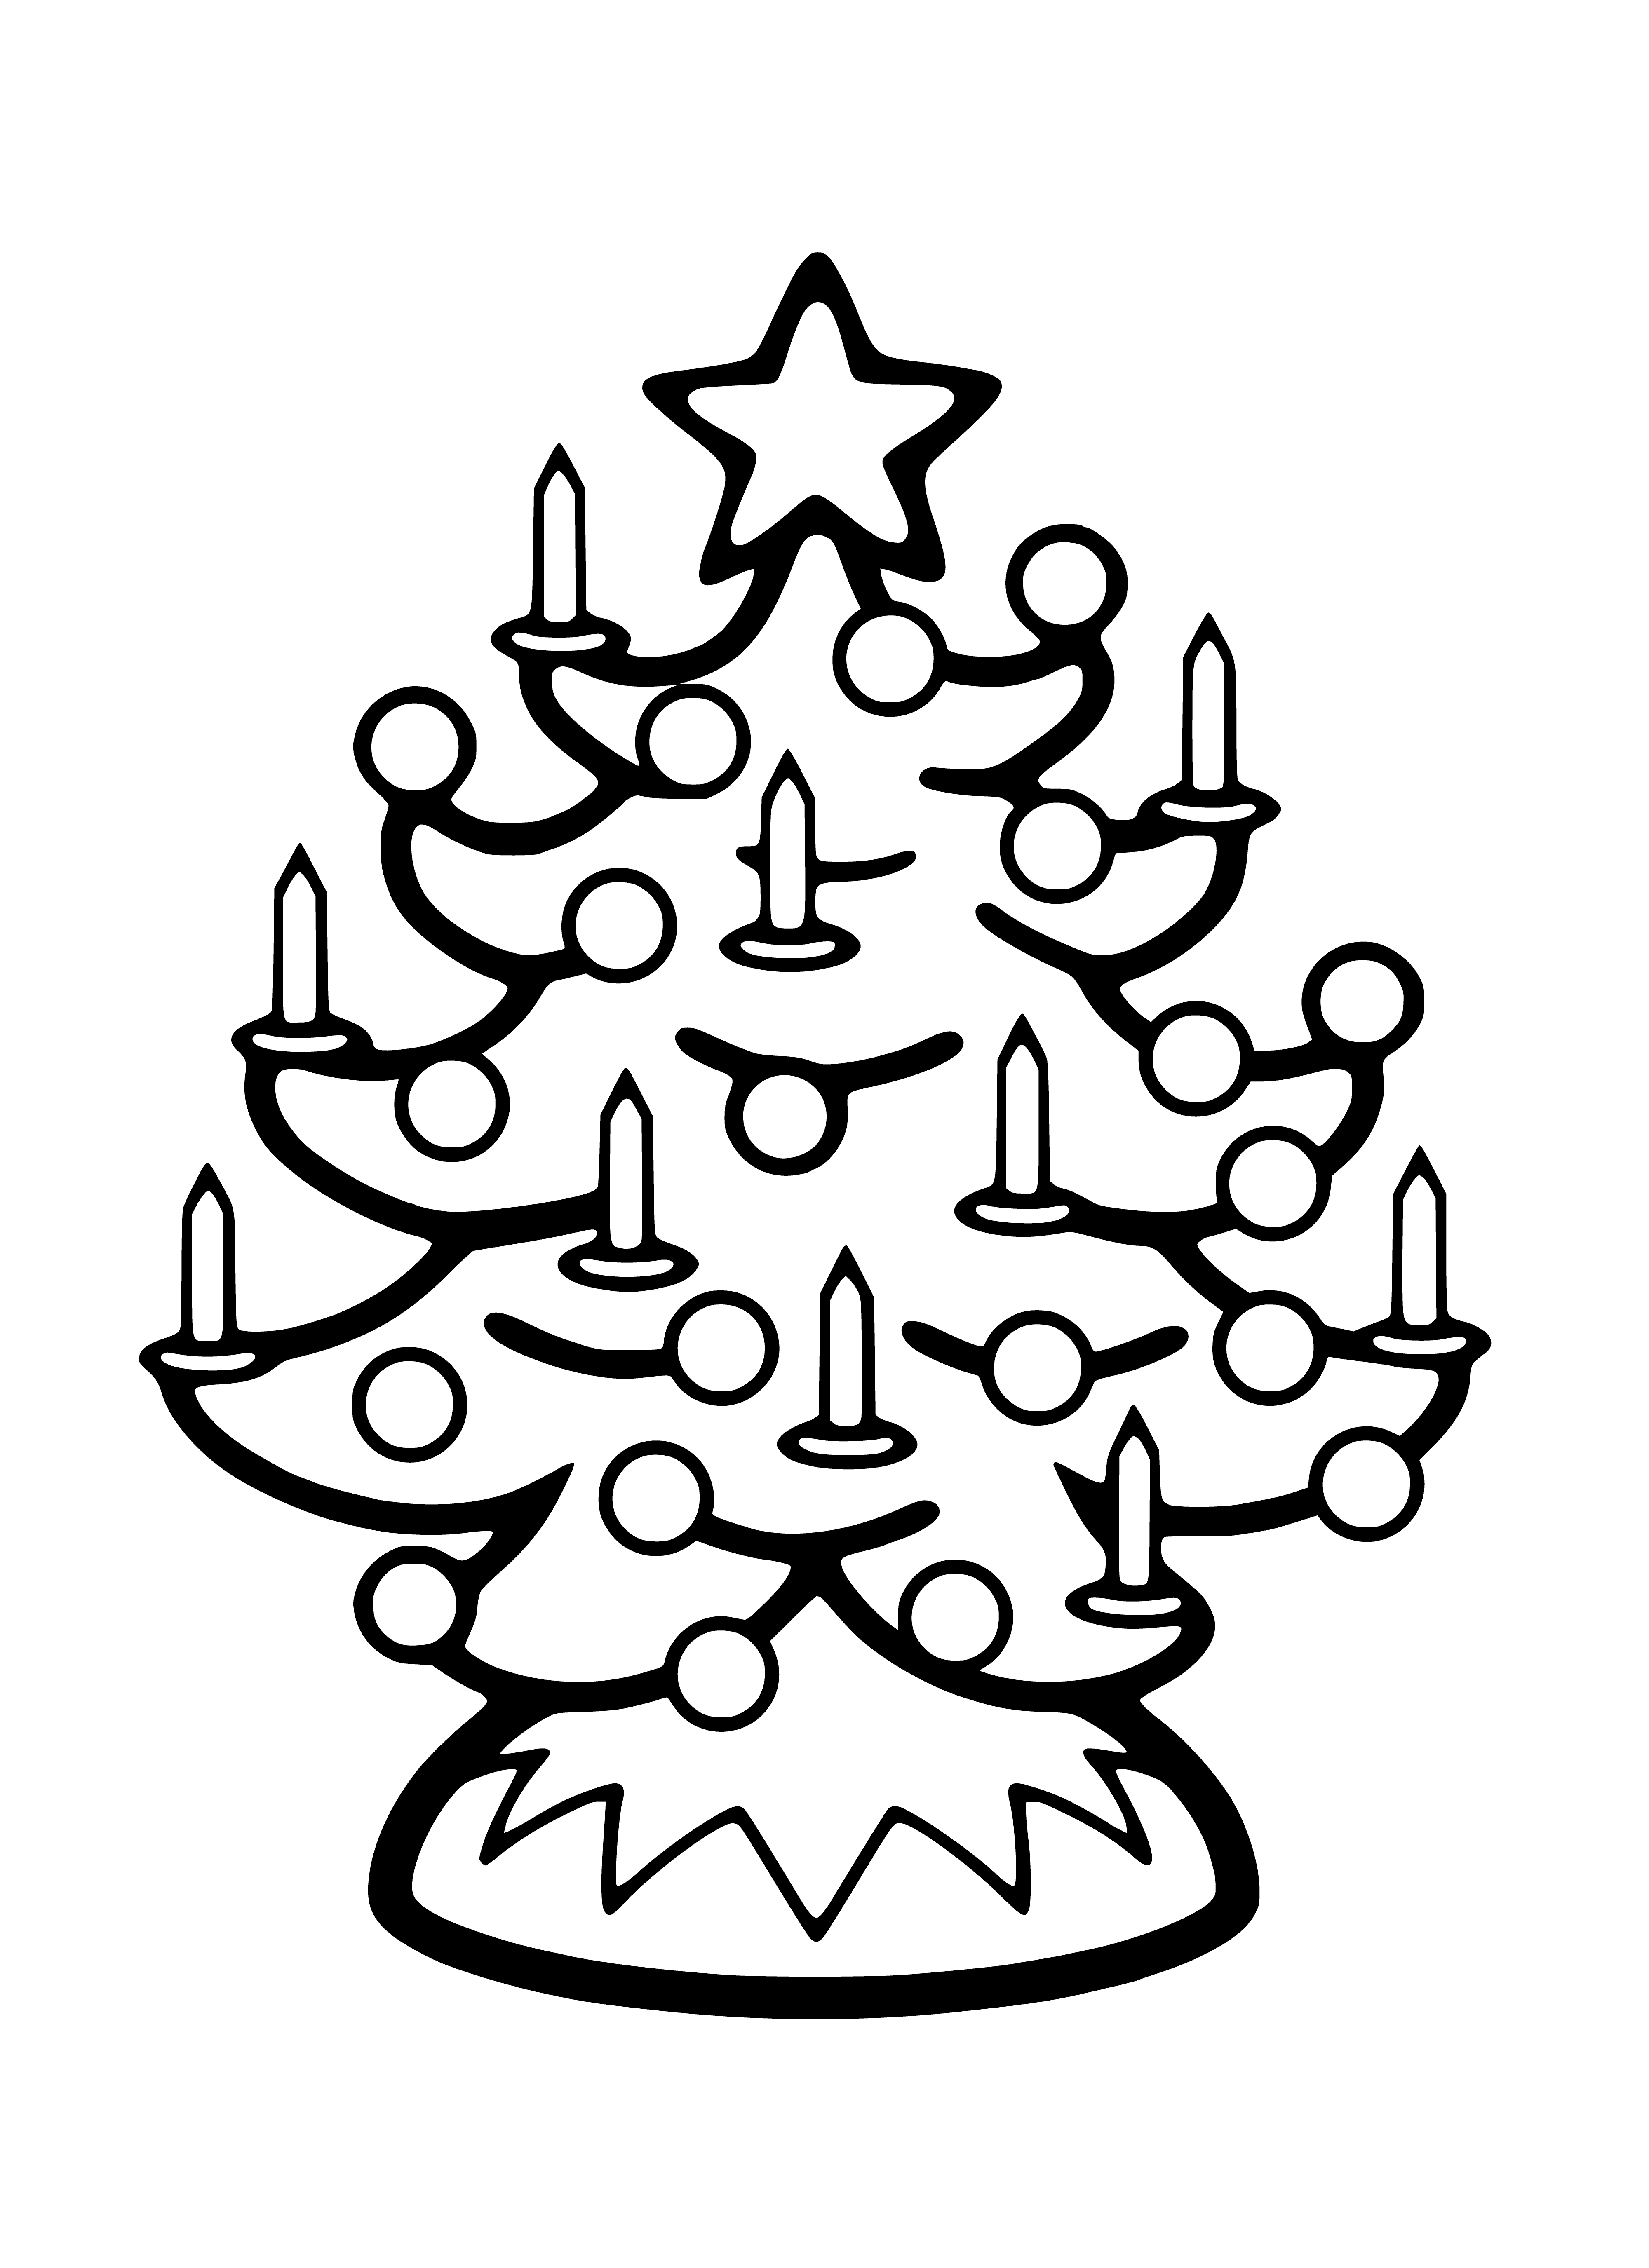 Coloring page of a Christmas tree with various colored candles, star, snowflake & candy cane ornaments.